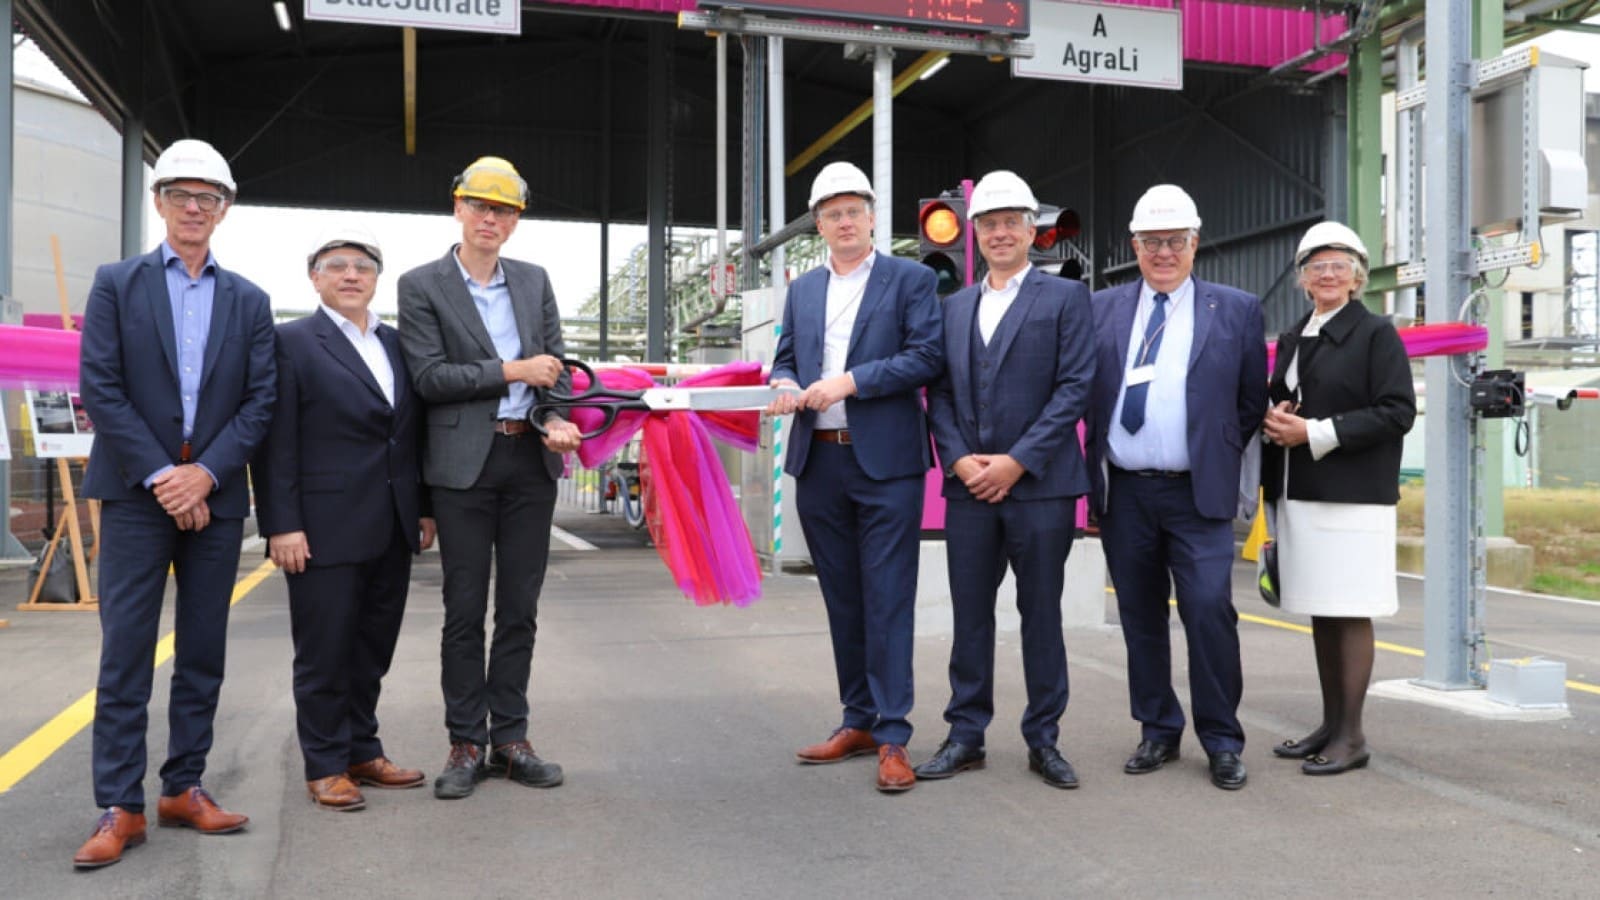 Evonik enhances infrastructure for AgraLi and blueSulfate at Antwerp site